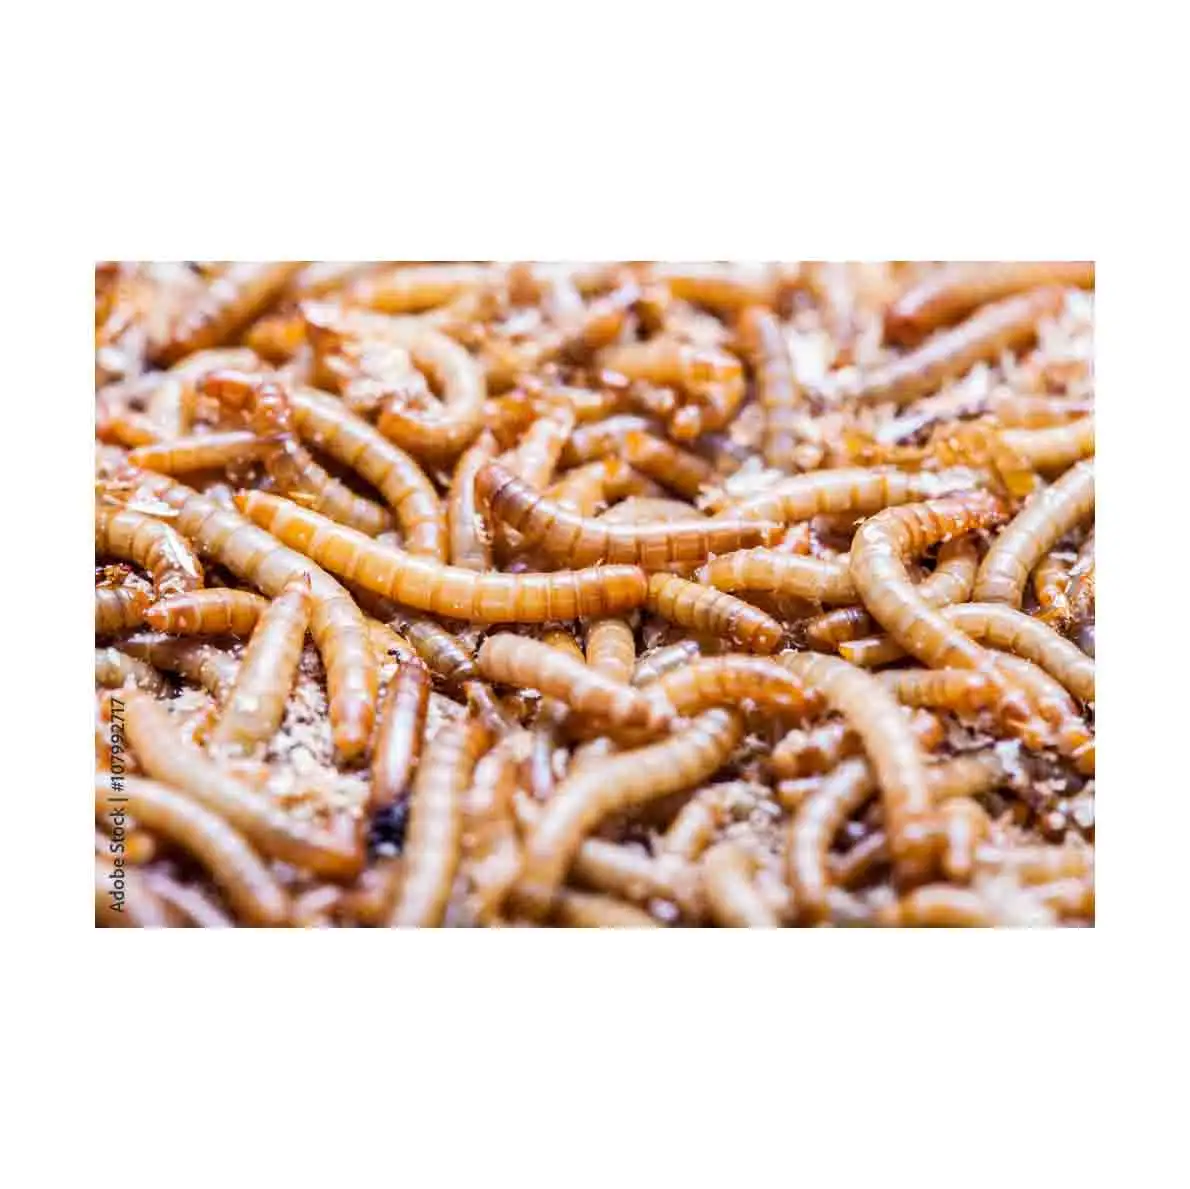 Dried Meal Worms/Mealworms for Poultry Feed Animal